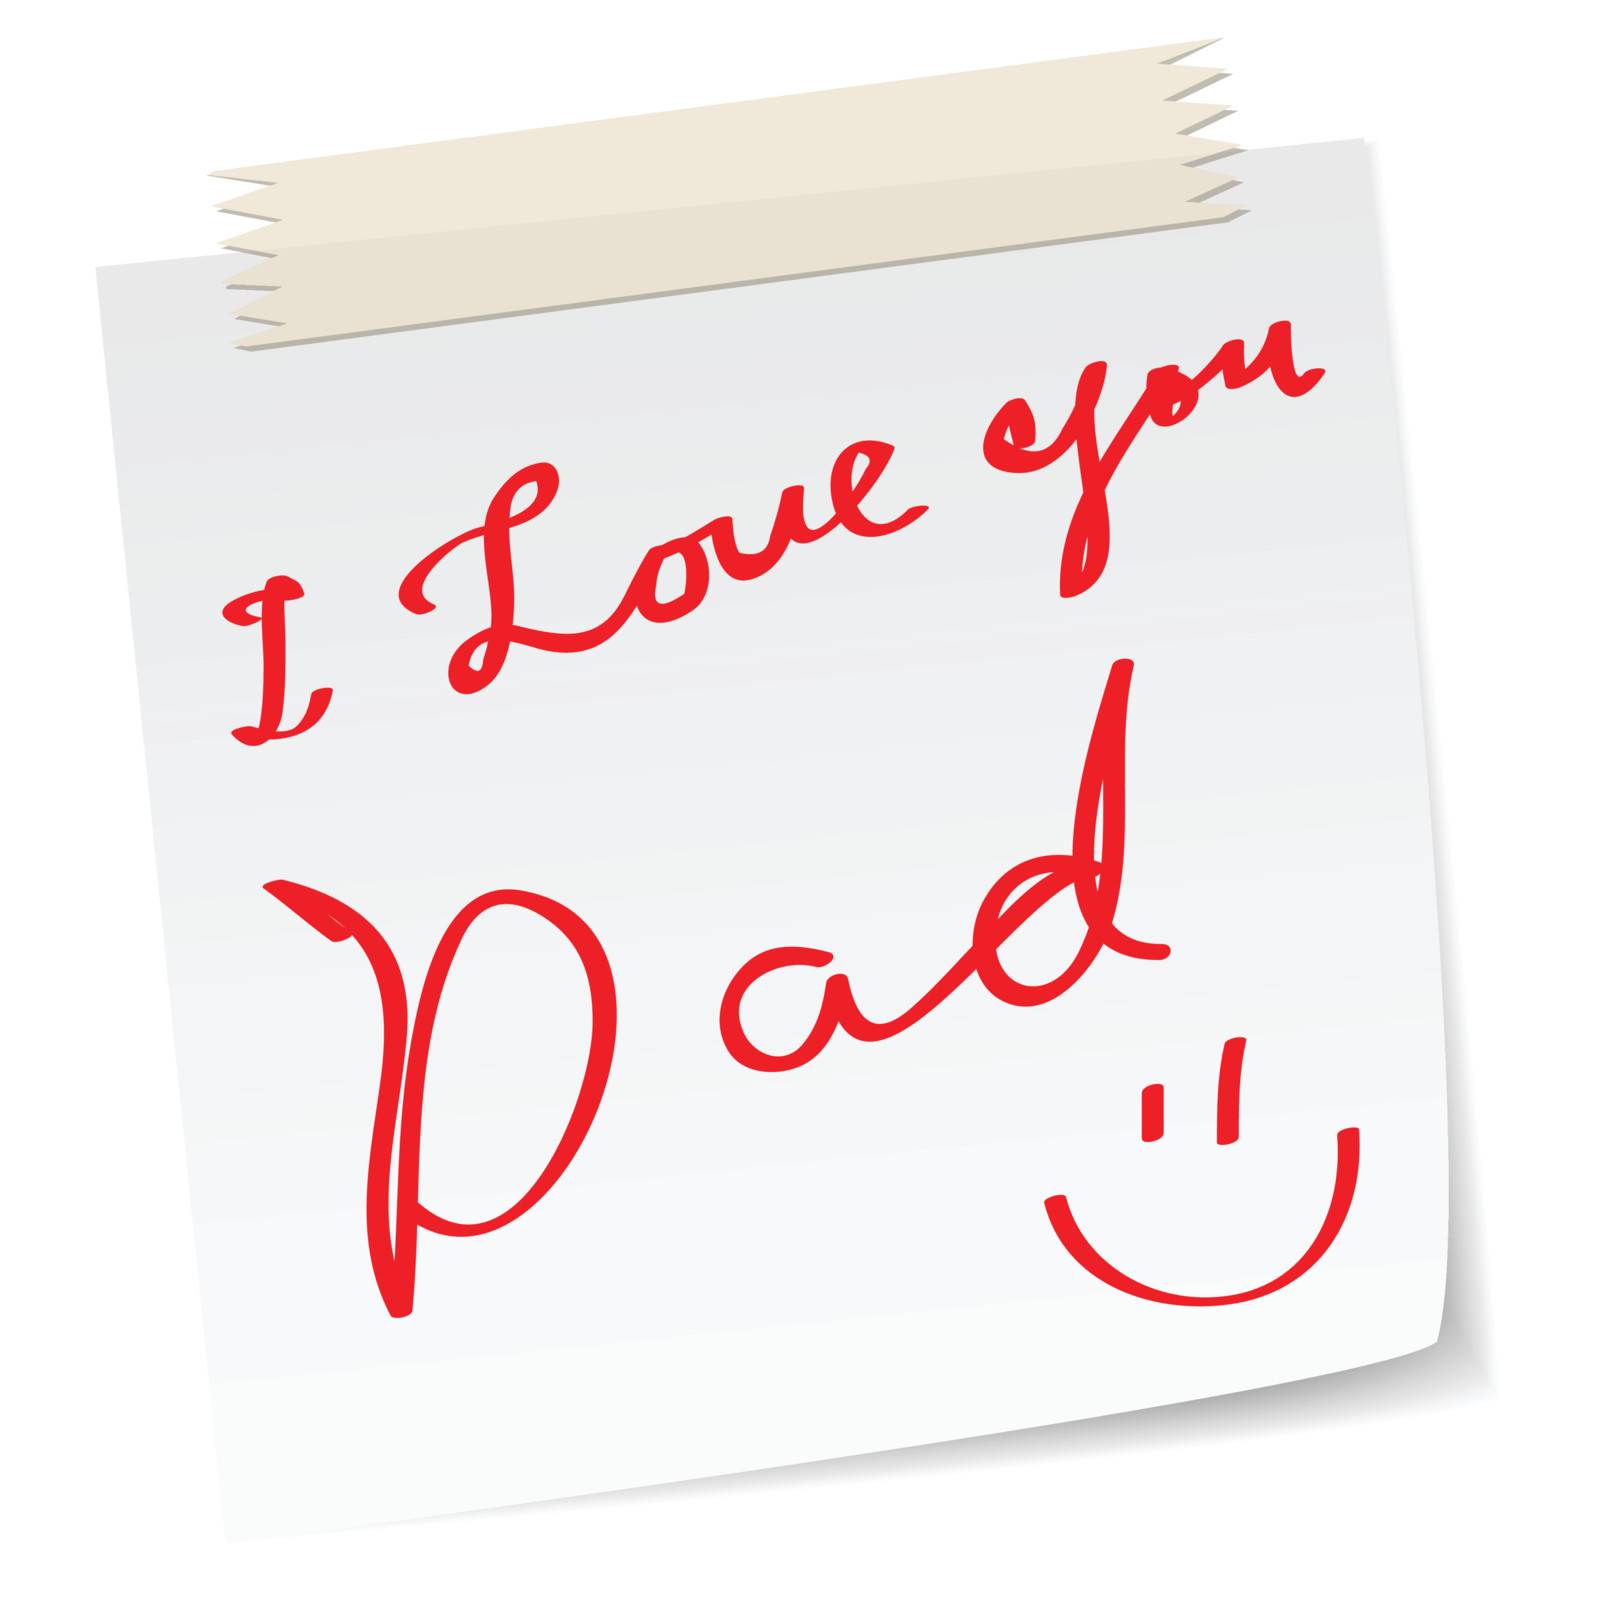 father day greetings on a paper notes, with handwritten message.